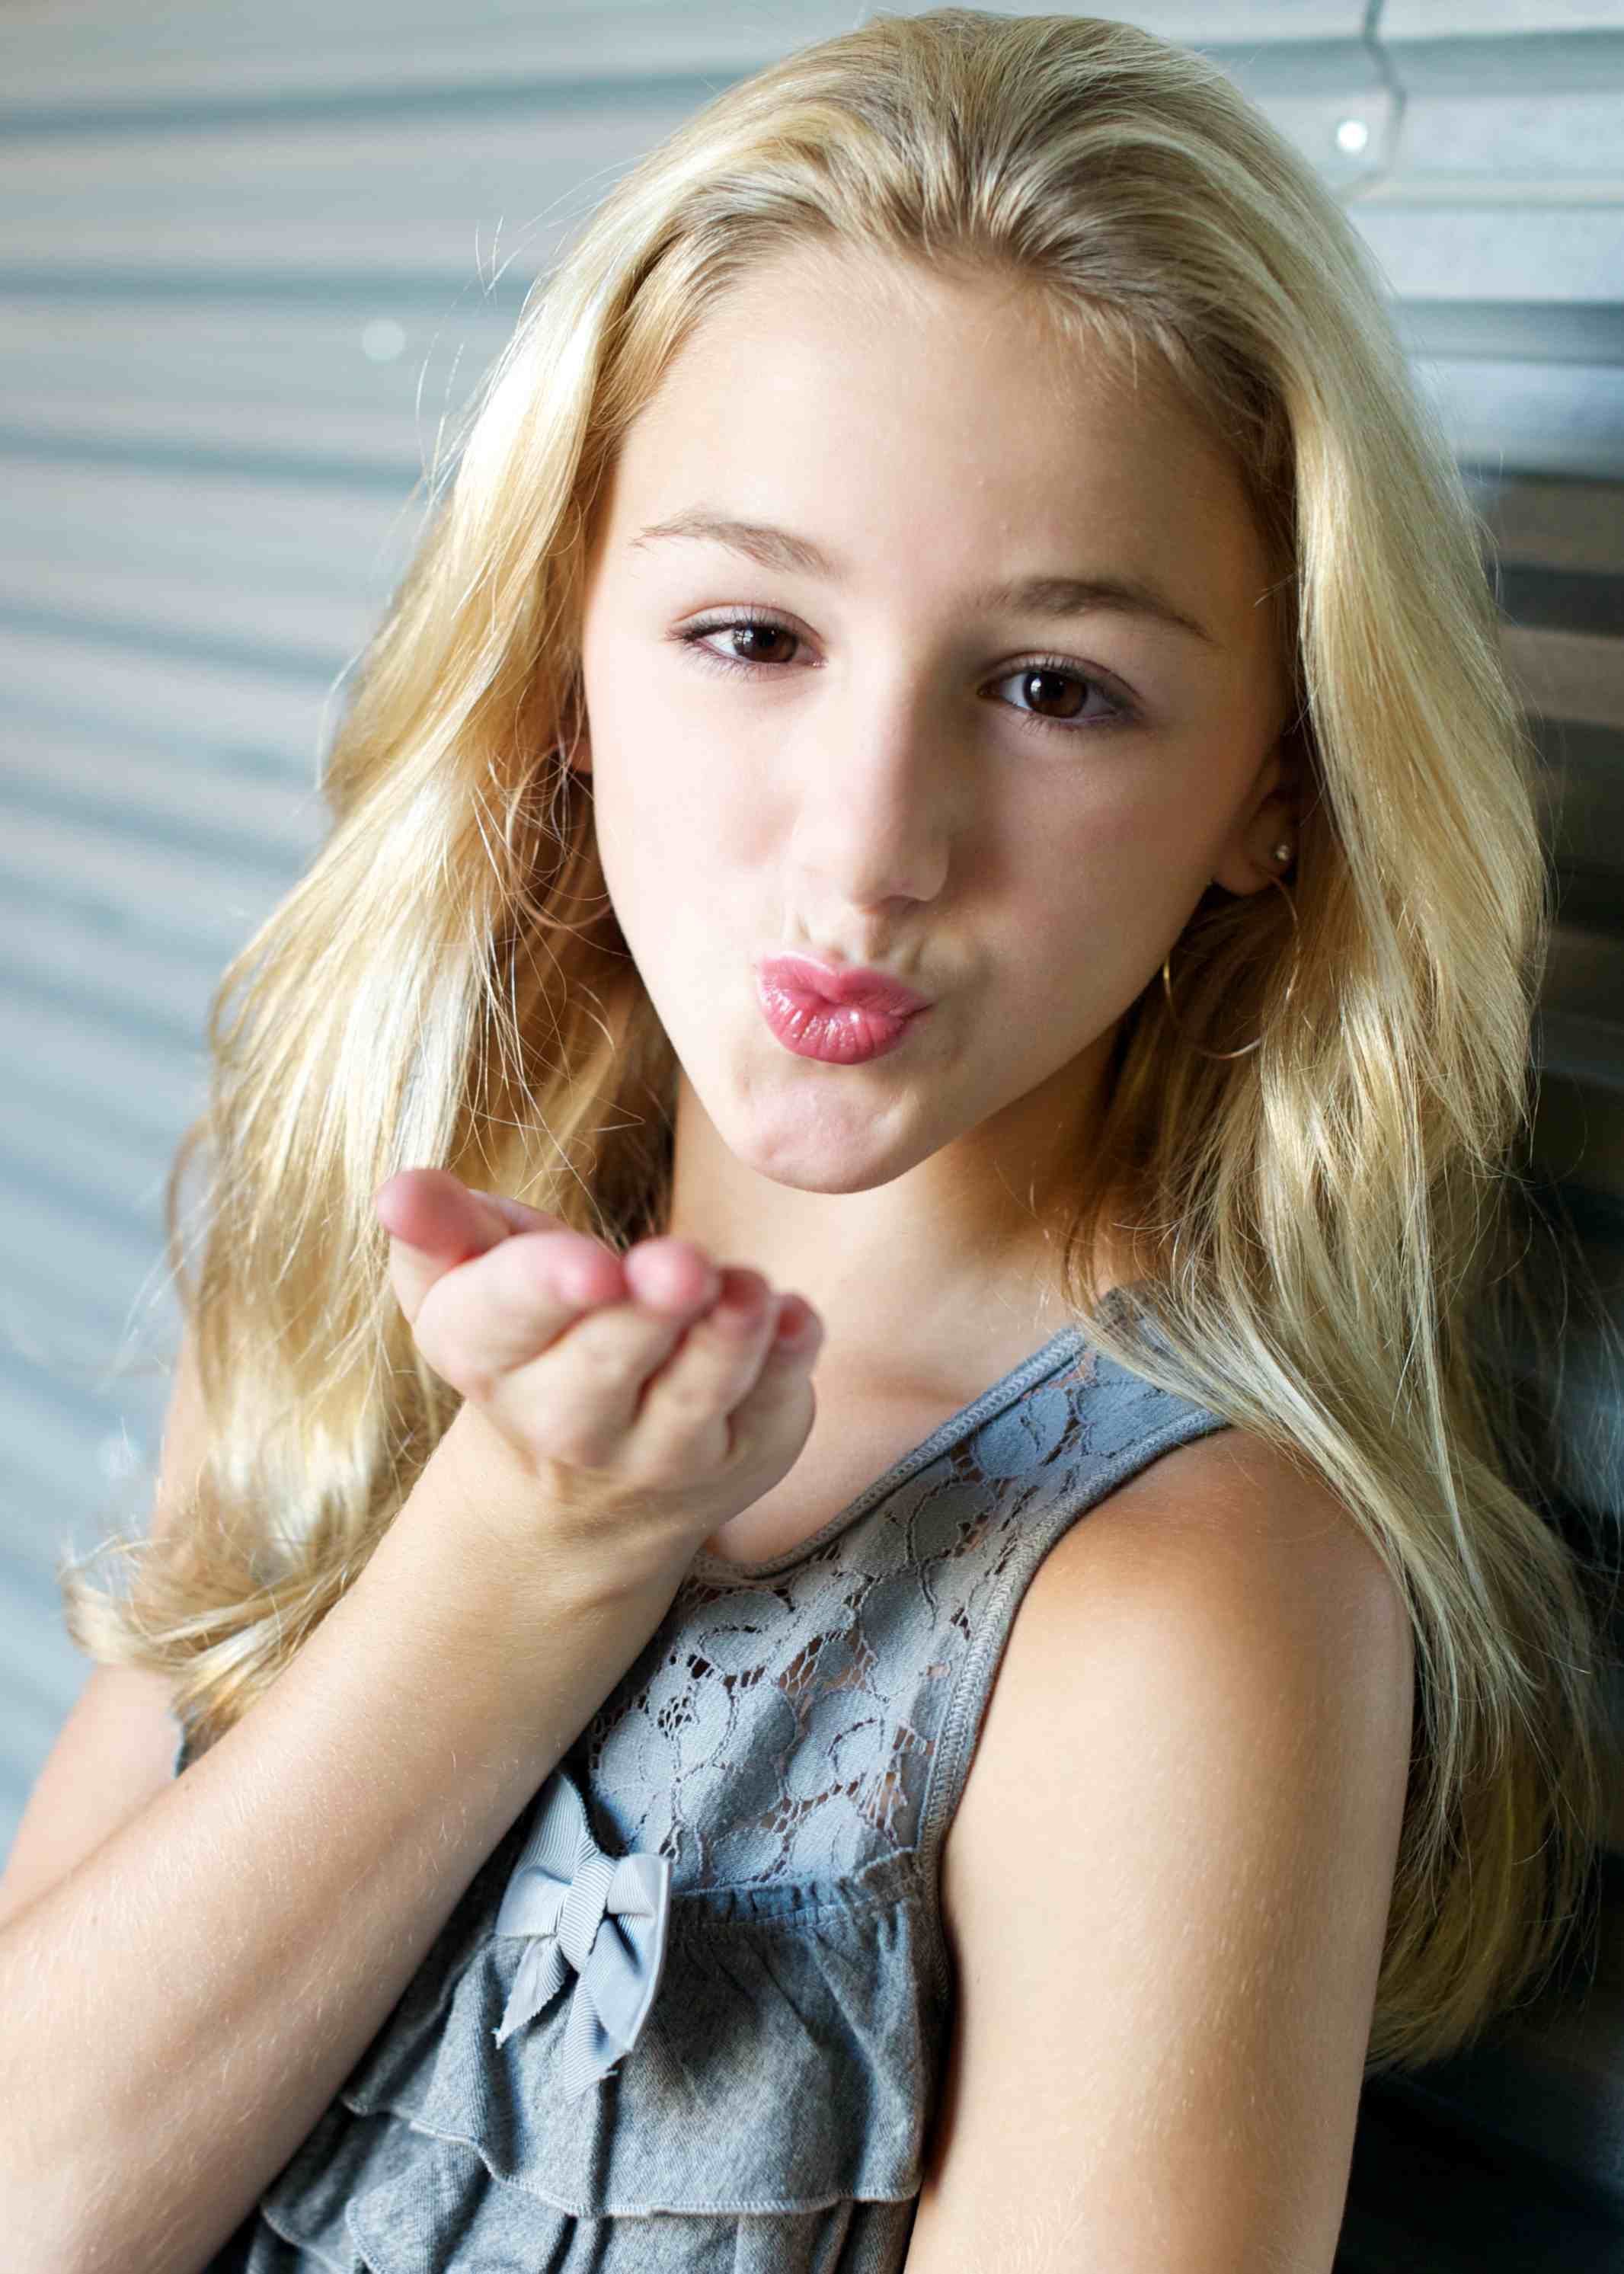 images of moms | Eleven-year-old Chloe Lukasiak is one of the stars of Dance Moms.